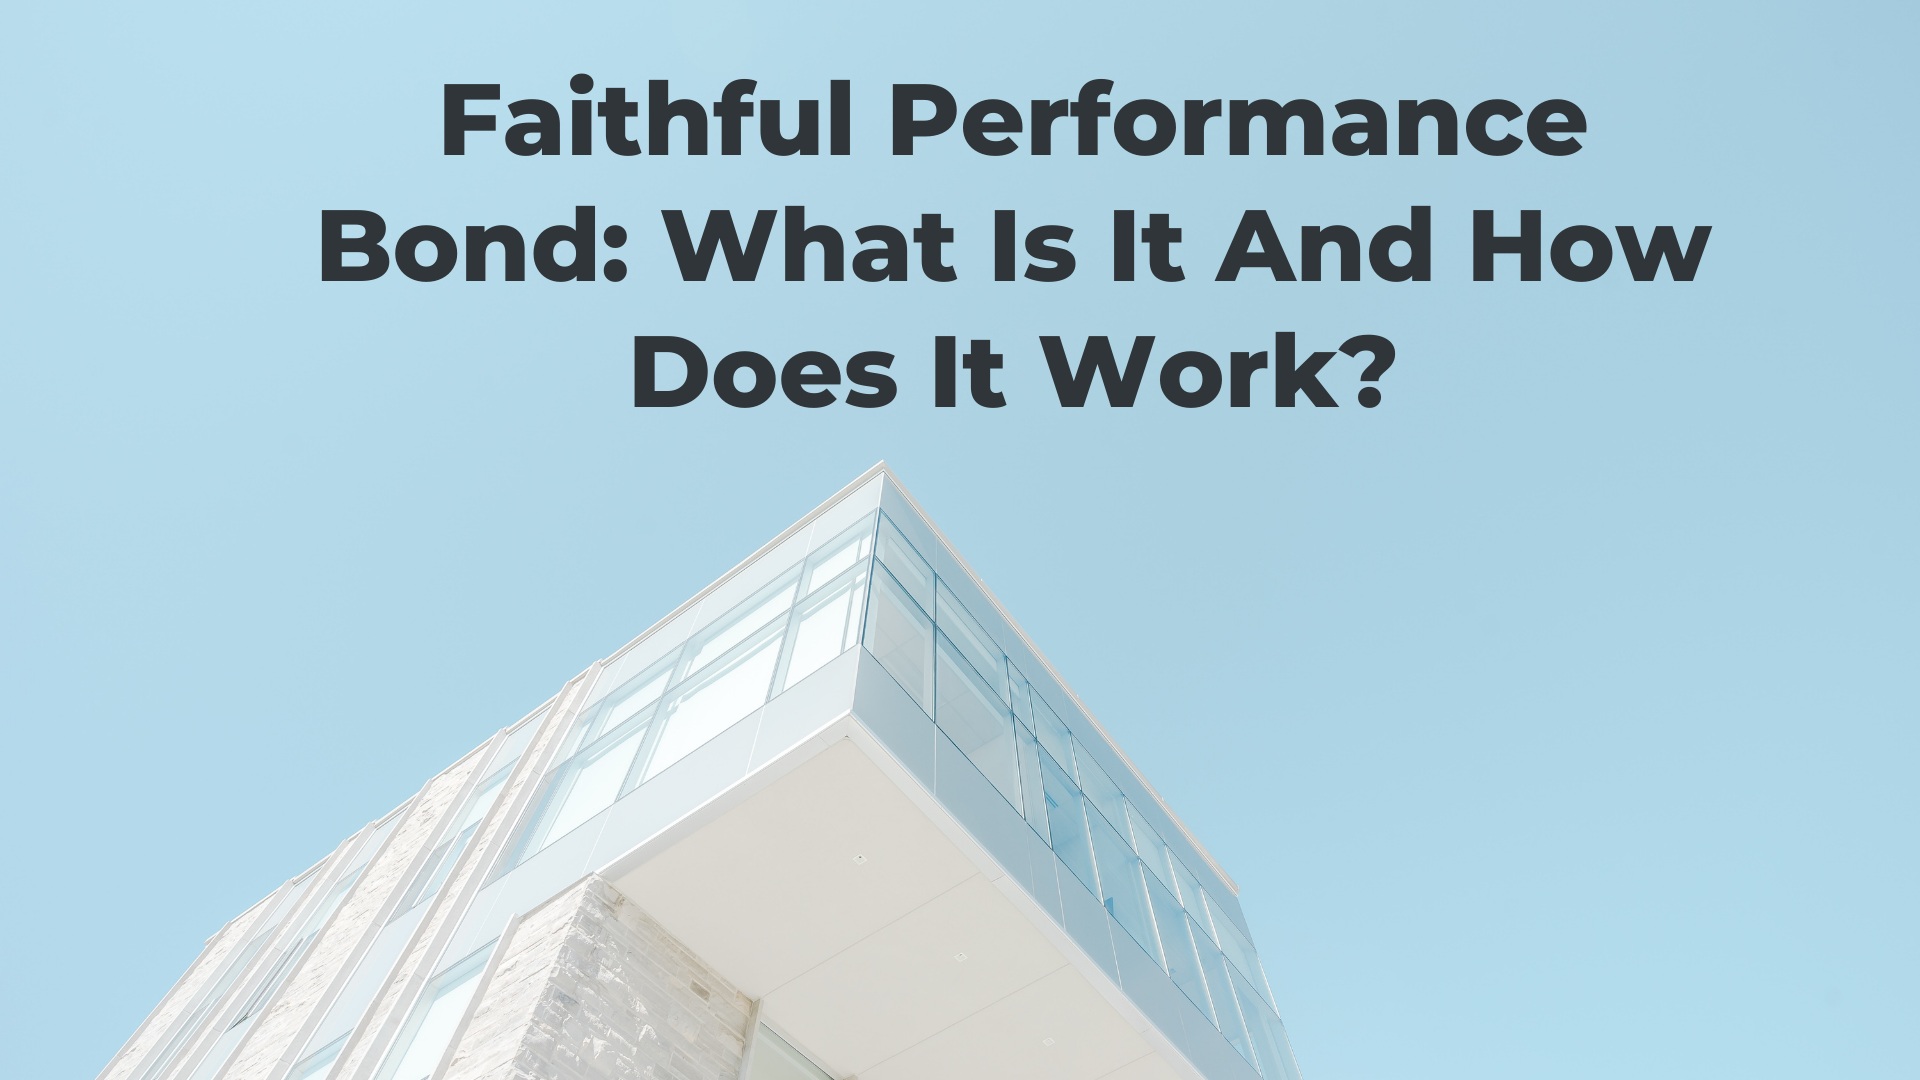 performance bond - What is the definition of a faithful performance bond - white building